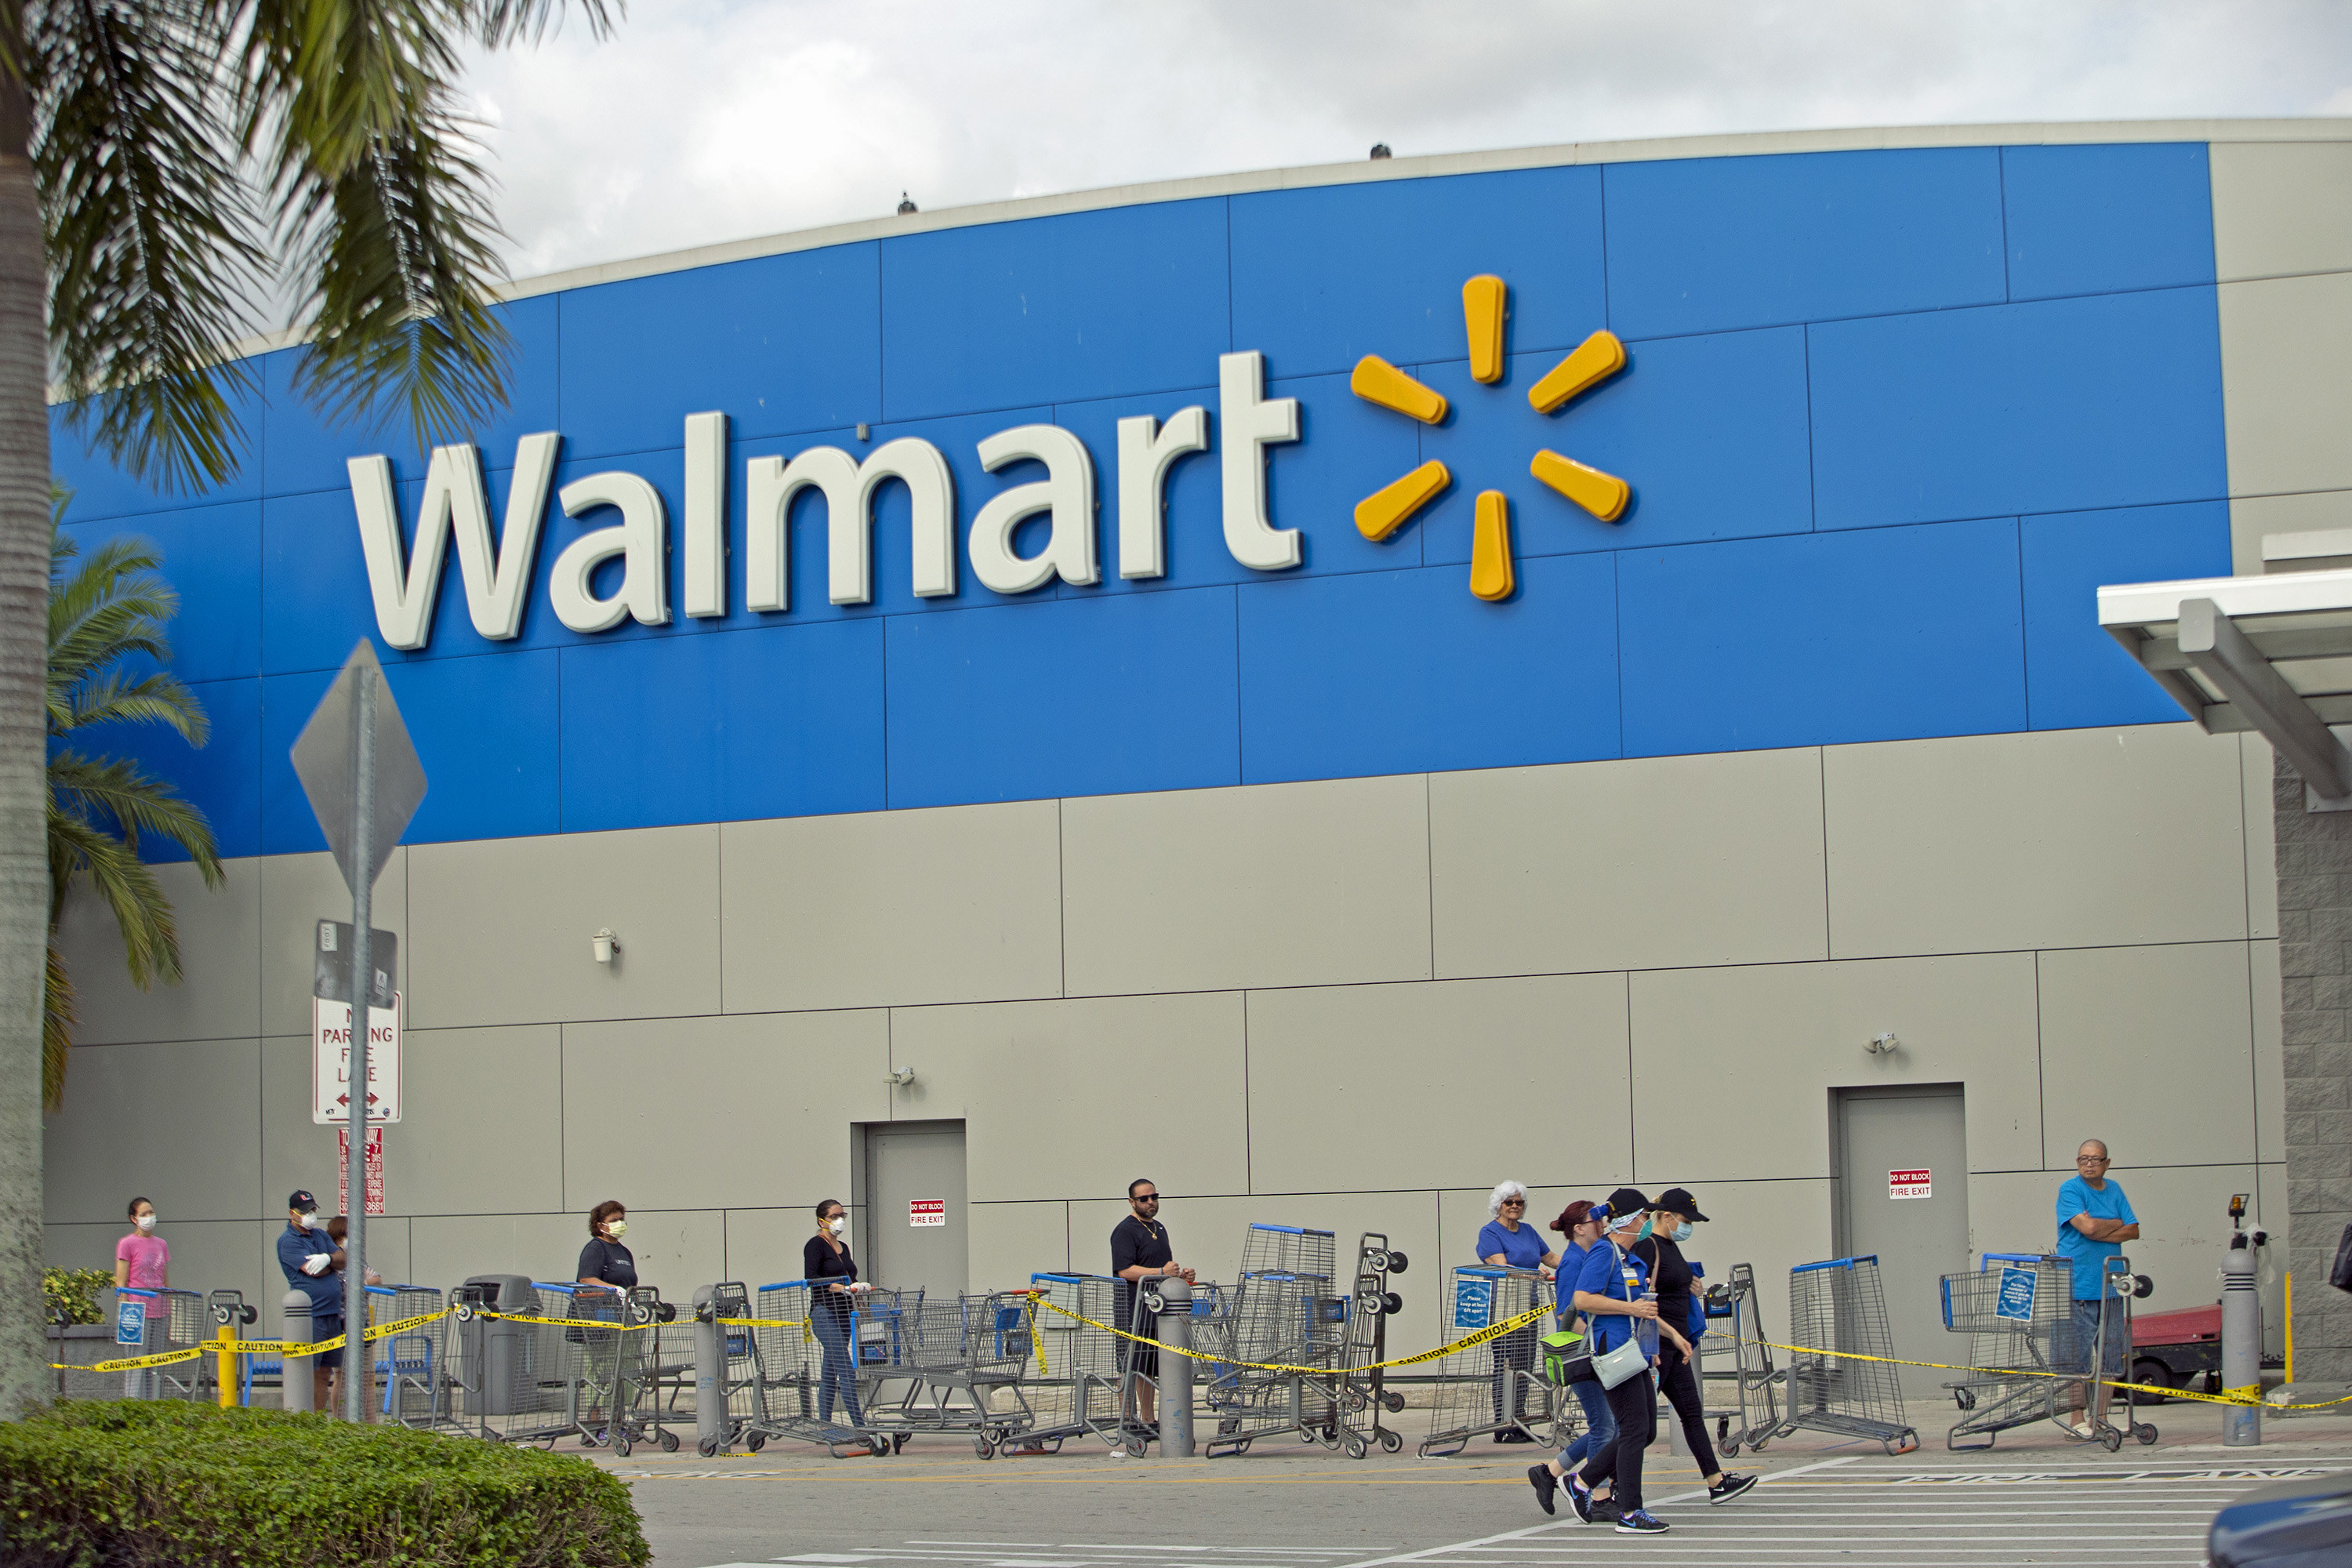 Inspectors Find Walmart Staff Not Wearing Protective Gear at Store Where 23  Employees Tested Positive for COVID-19